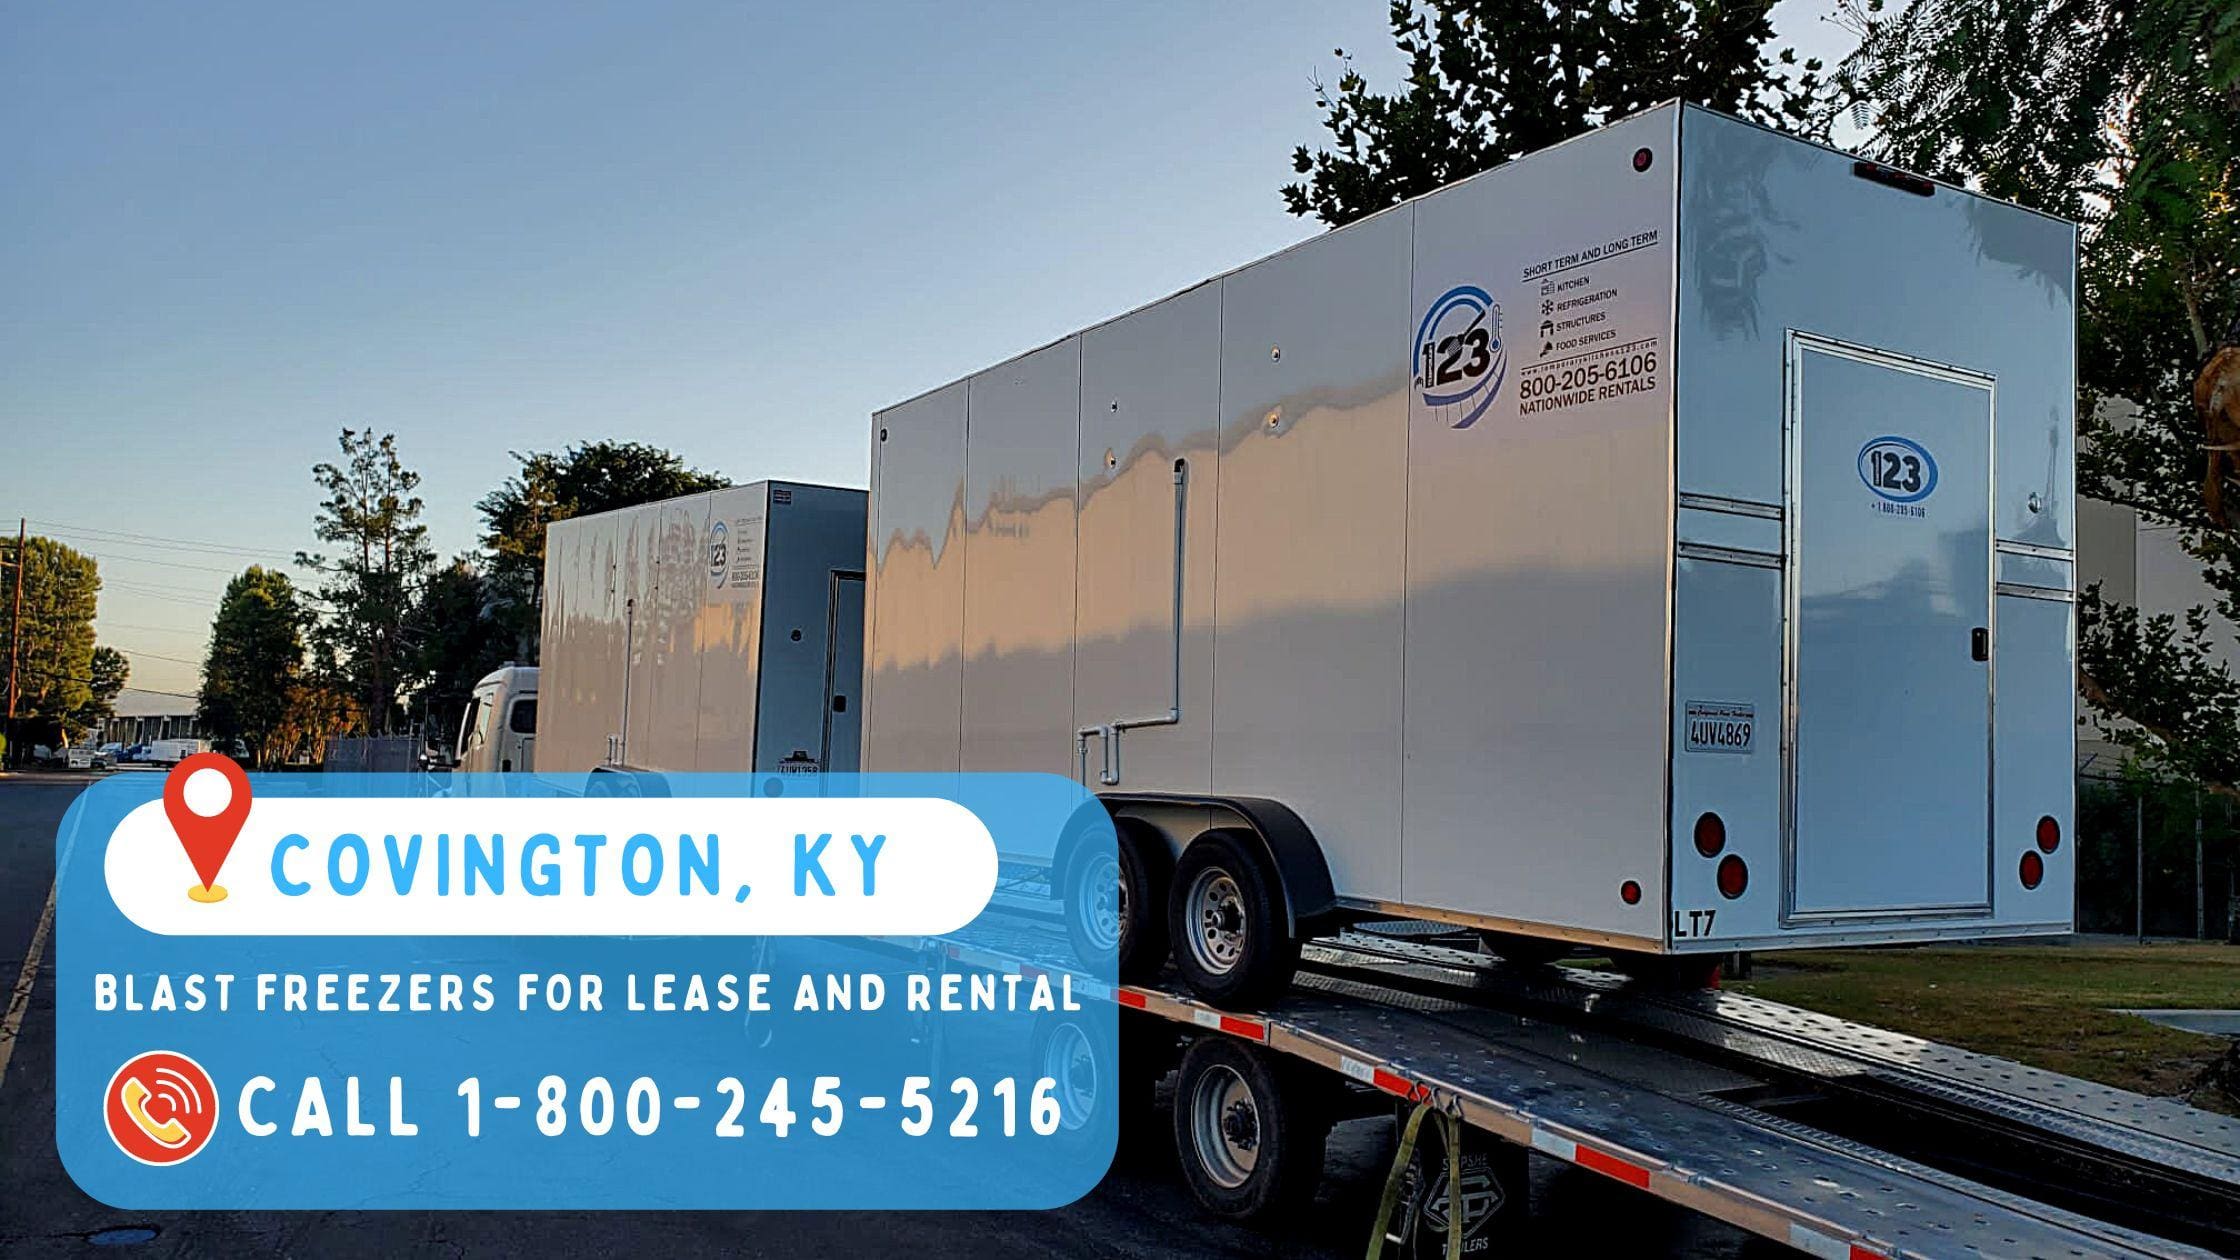 Blast Freezers for lease and rental in Covington, KY